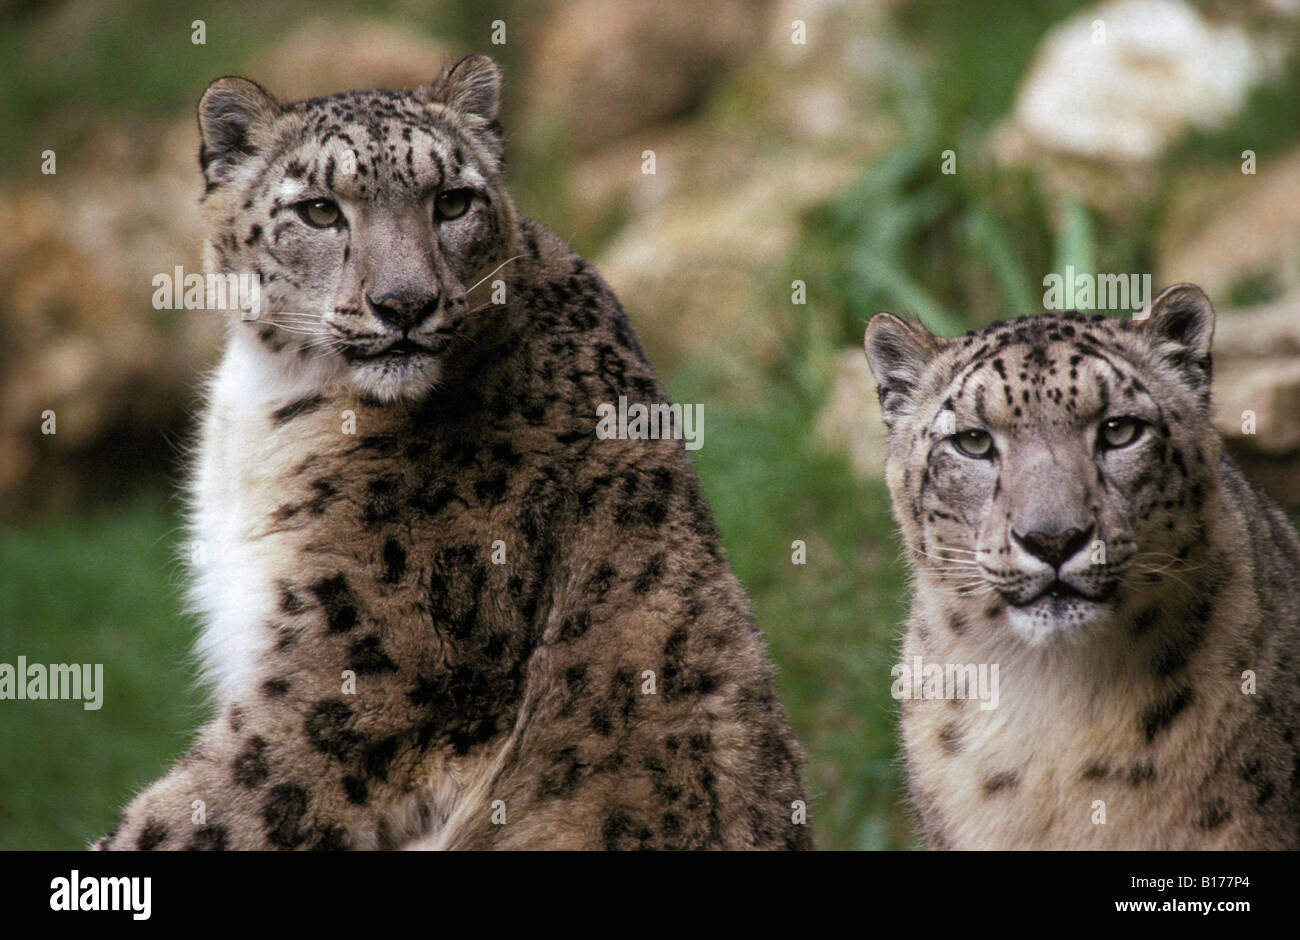 panthere des neiges chneeleopard Snow Leopard Panthera unica Unica unica pair affection animal Asia Asien big cat Carnivora carn Stock Photo